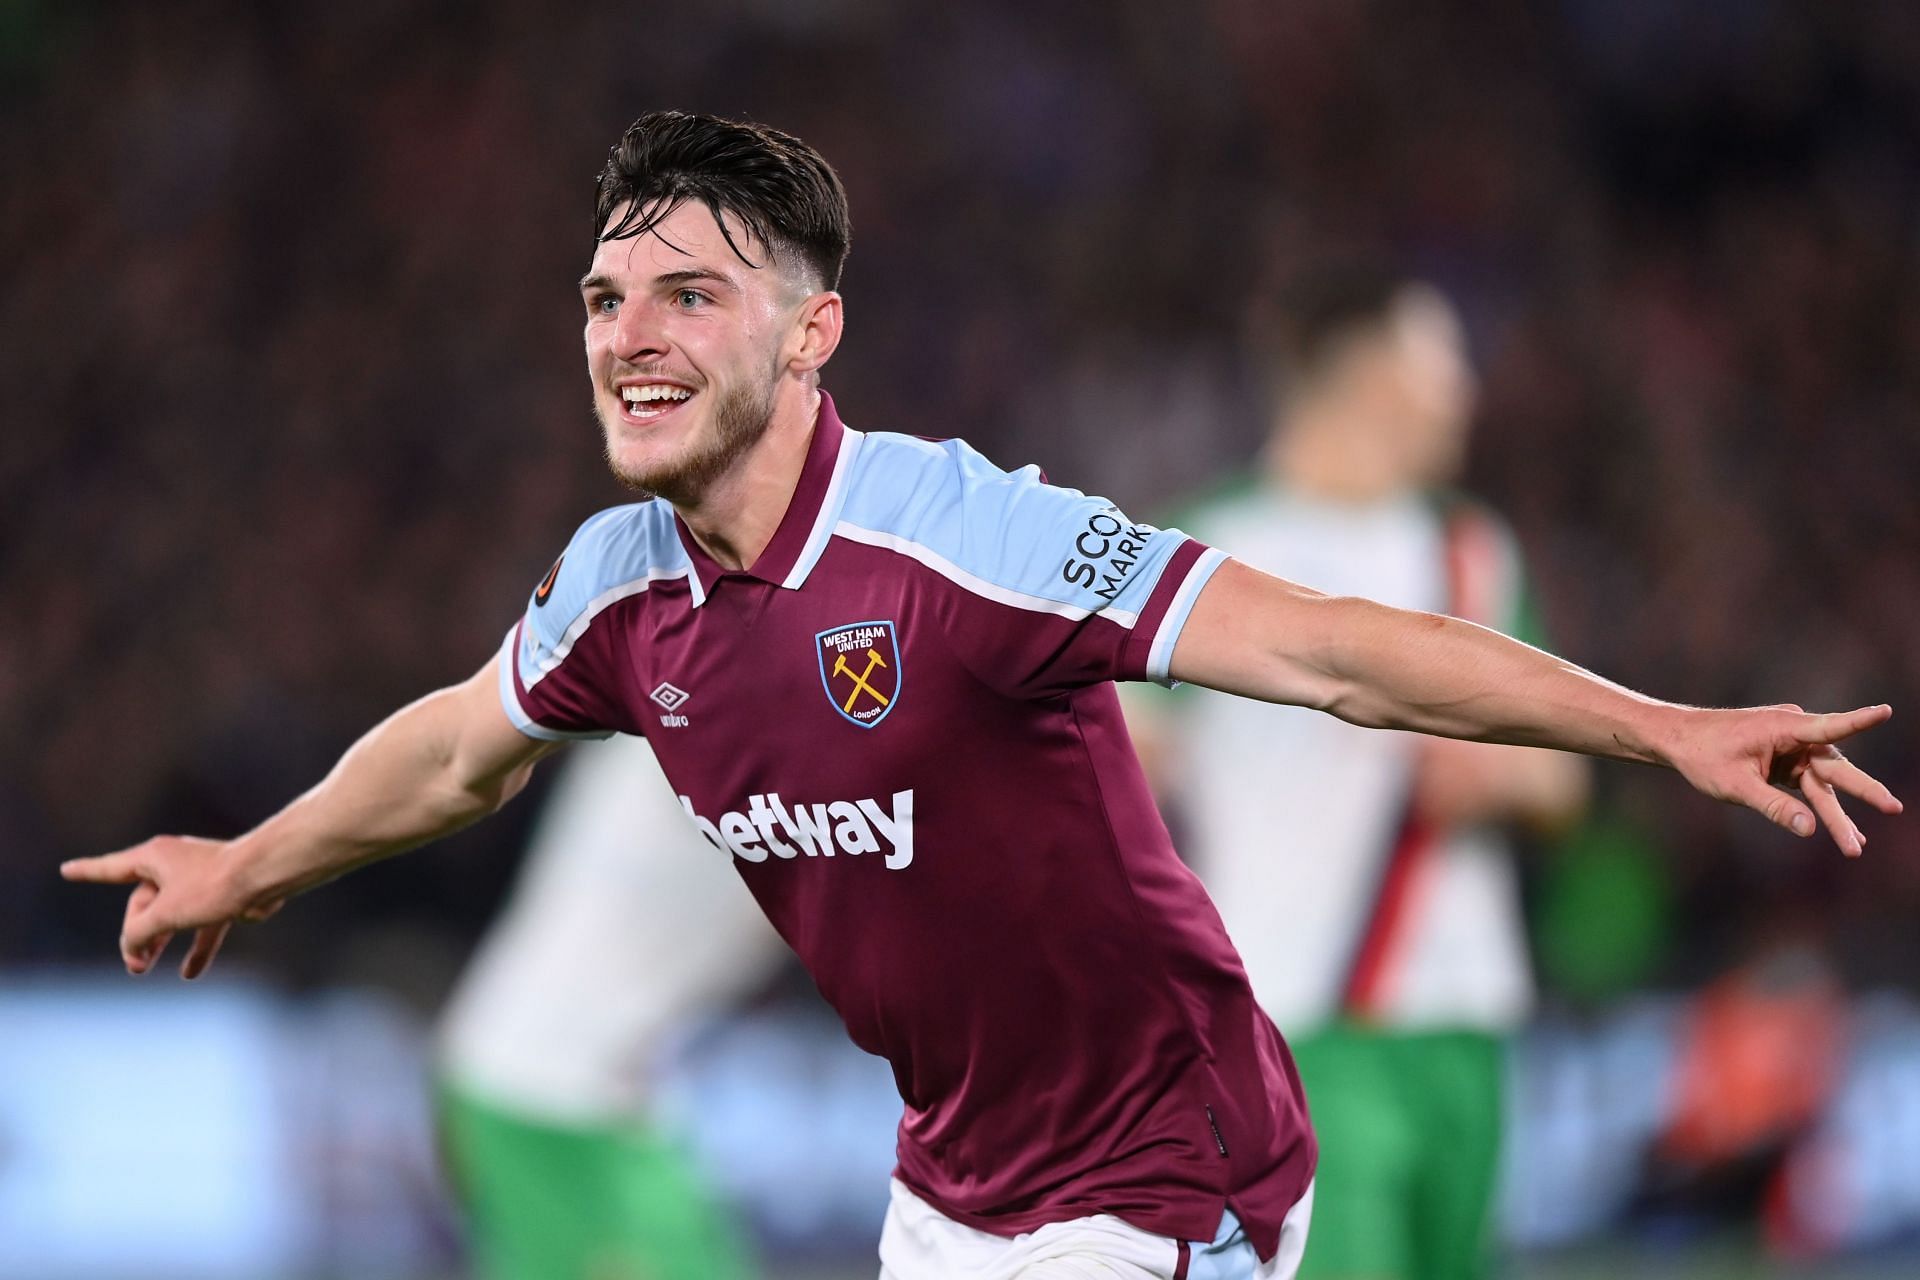 Jack Wilshere has advised Declan Rice to stay at West Ham United despite interest from Chelsea.